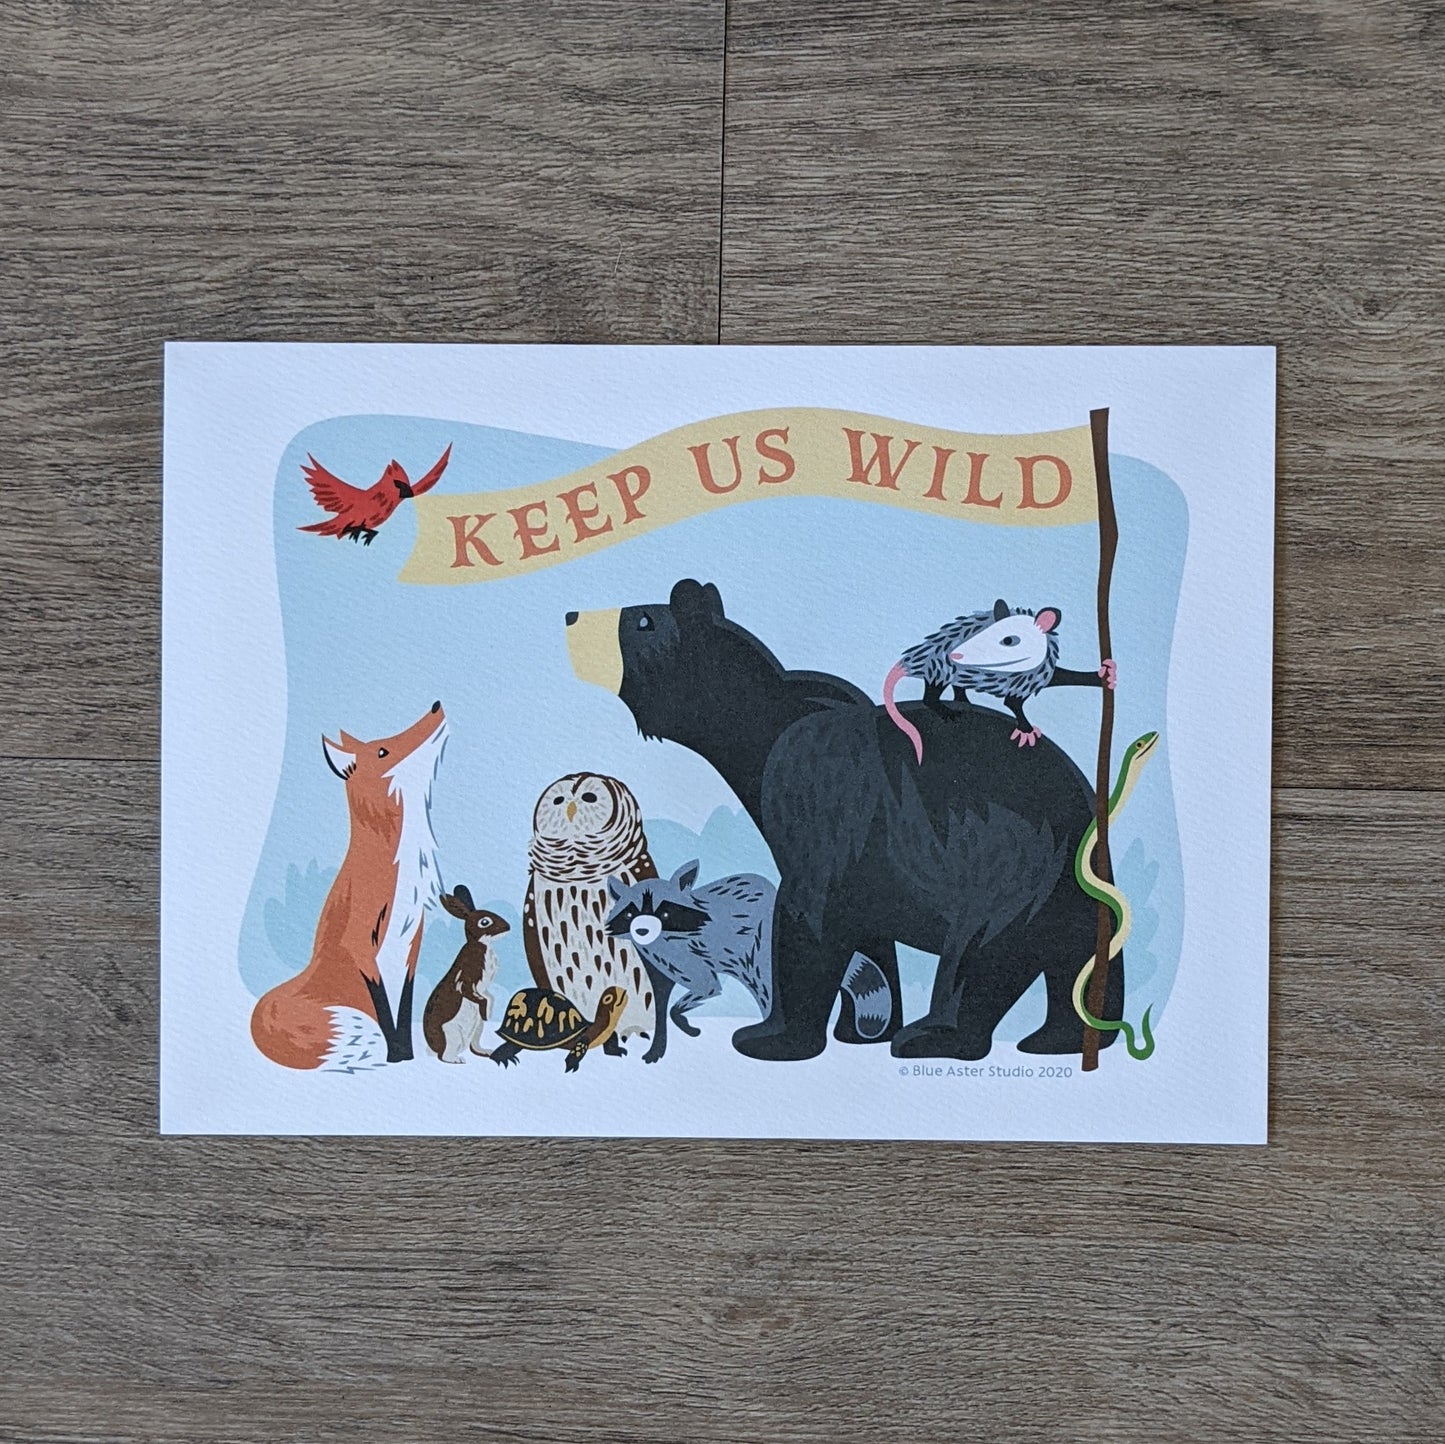 An art print of an illustration of a group of animals (bear, opossum, snake, raccoon, owl, turtle, rabbit, fox, and bird) holding a flag that reads "Keep Us Wild"